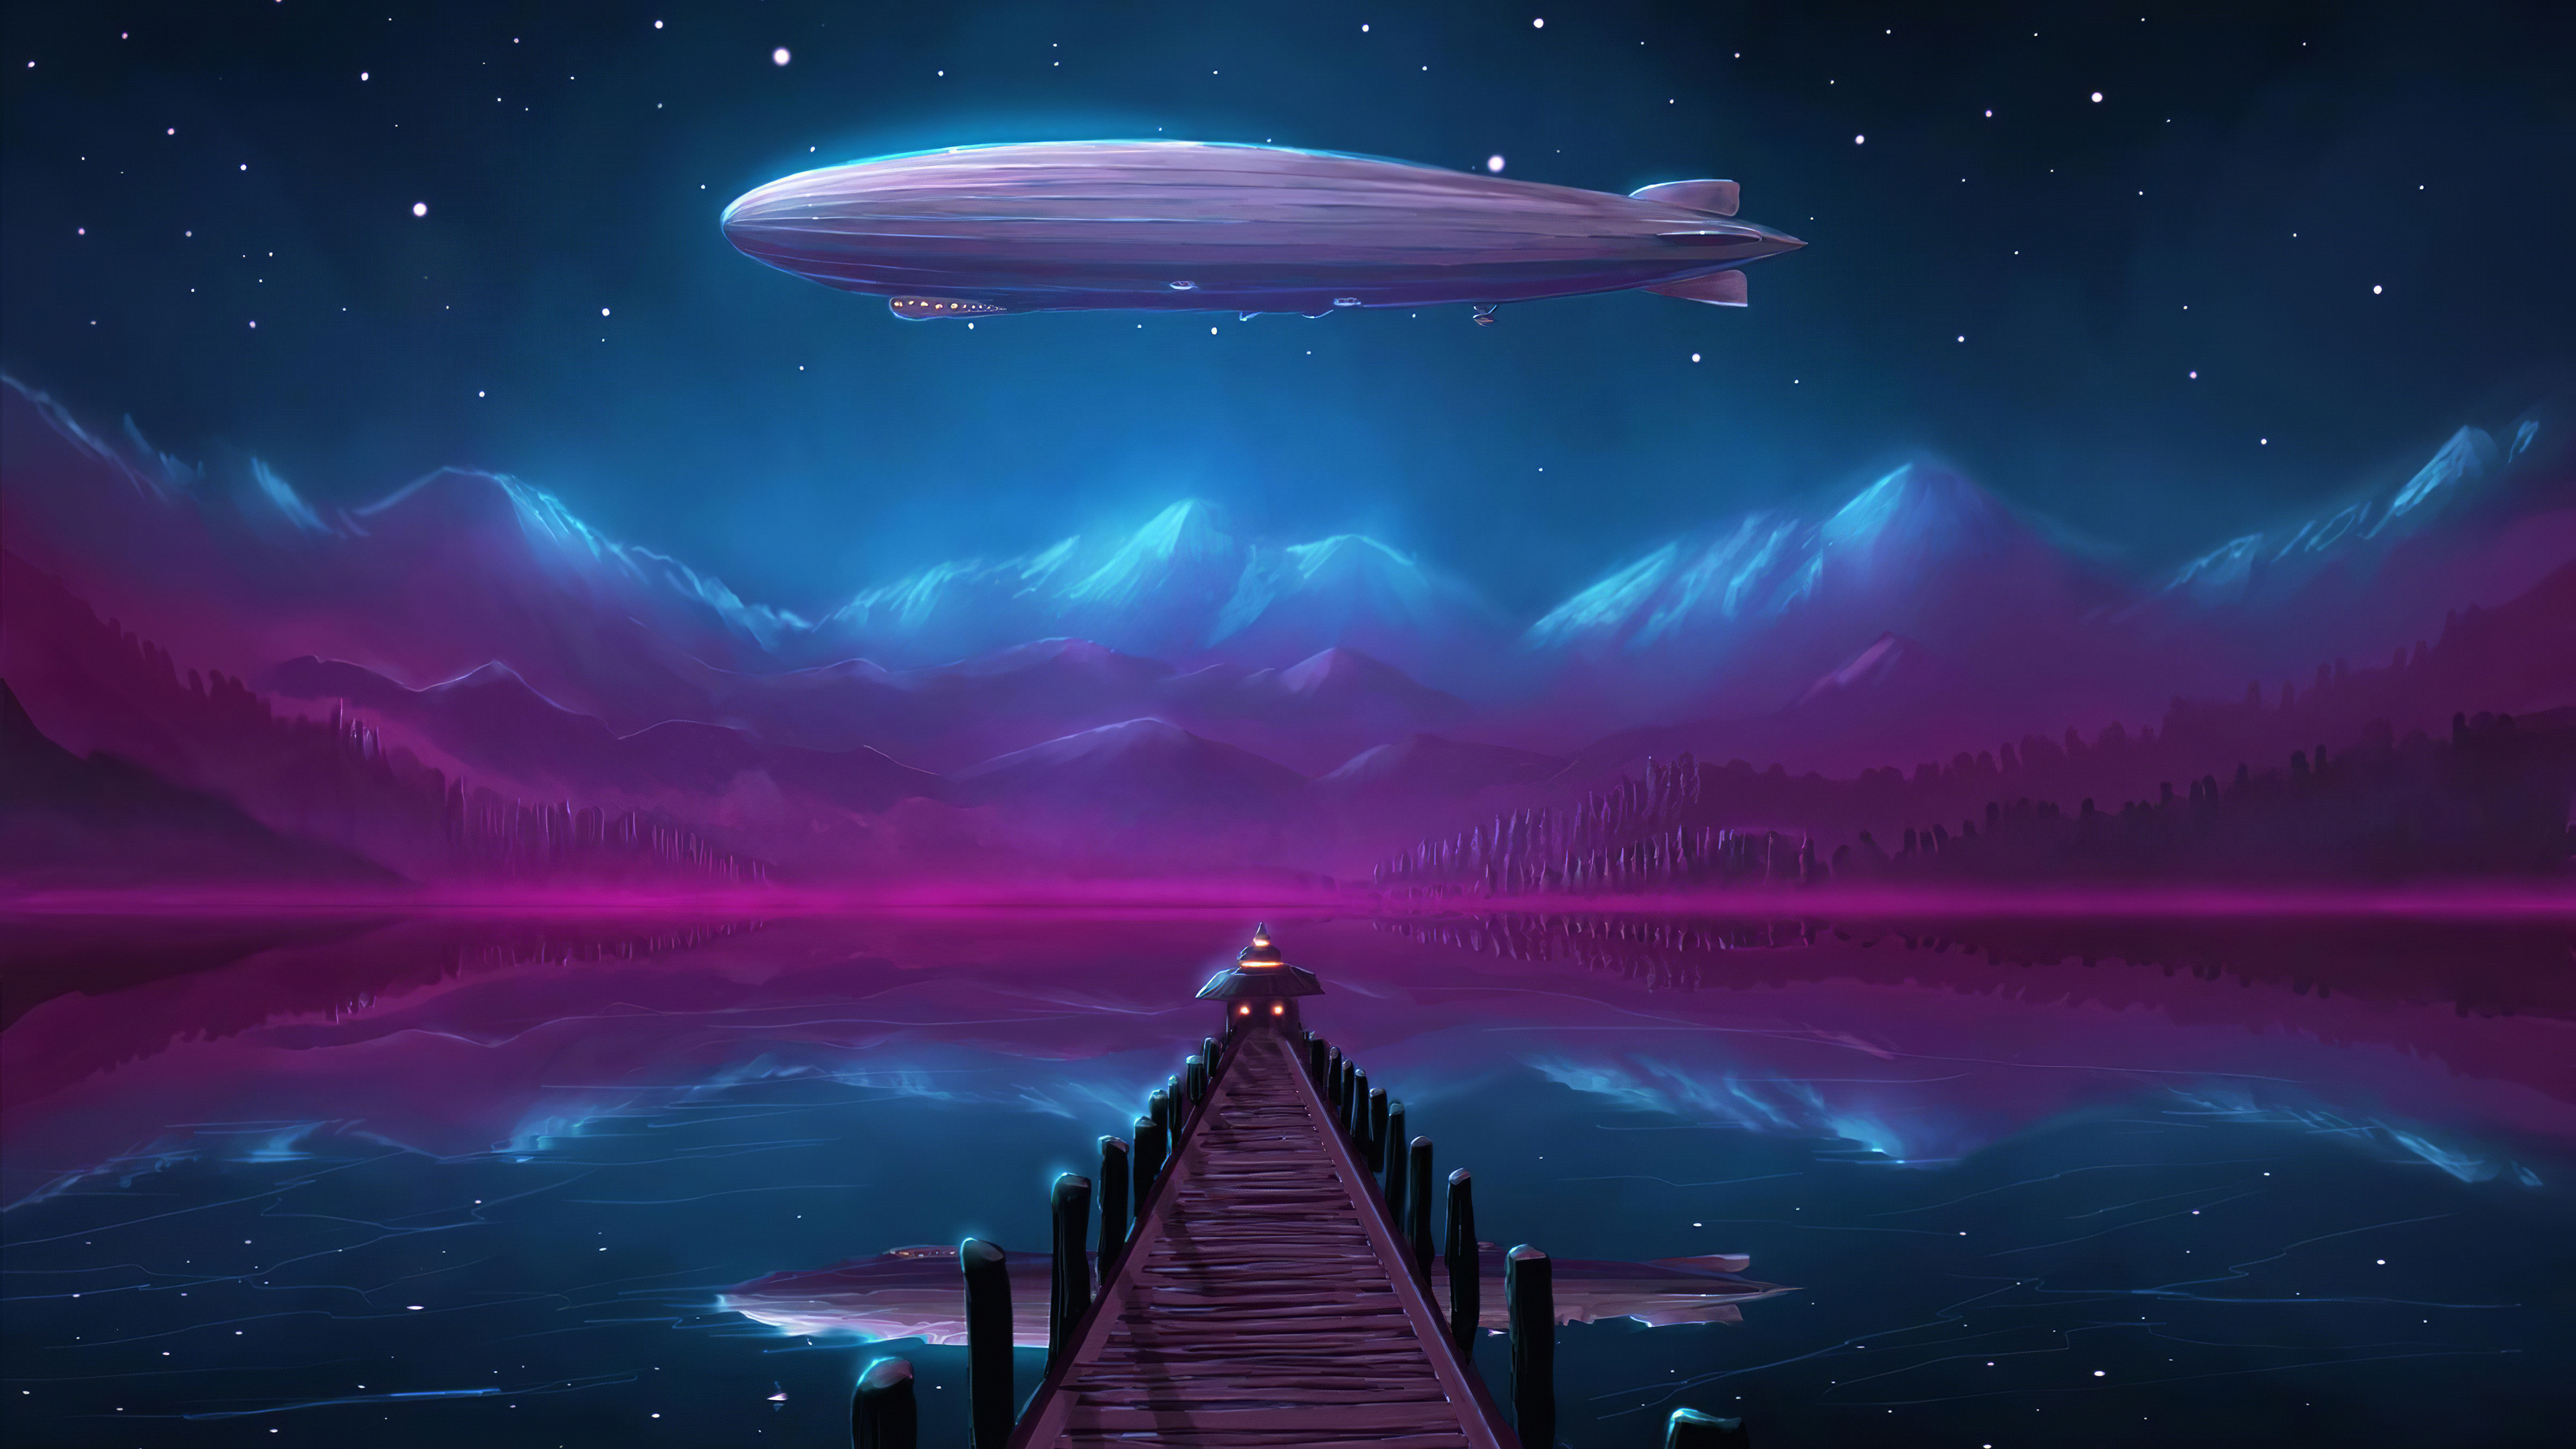 Zeppelin over Lake Pier at Night